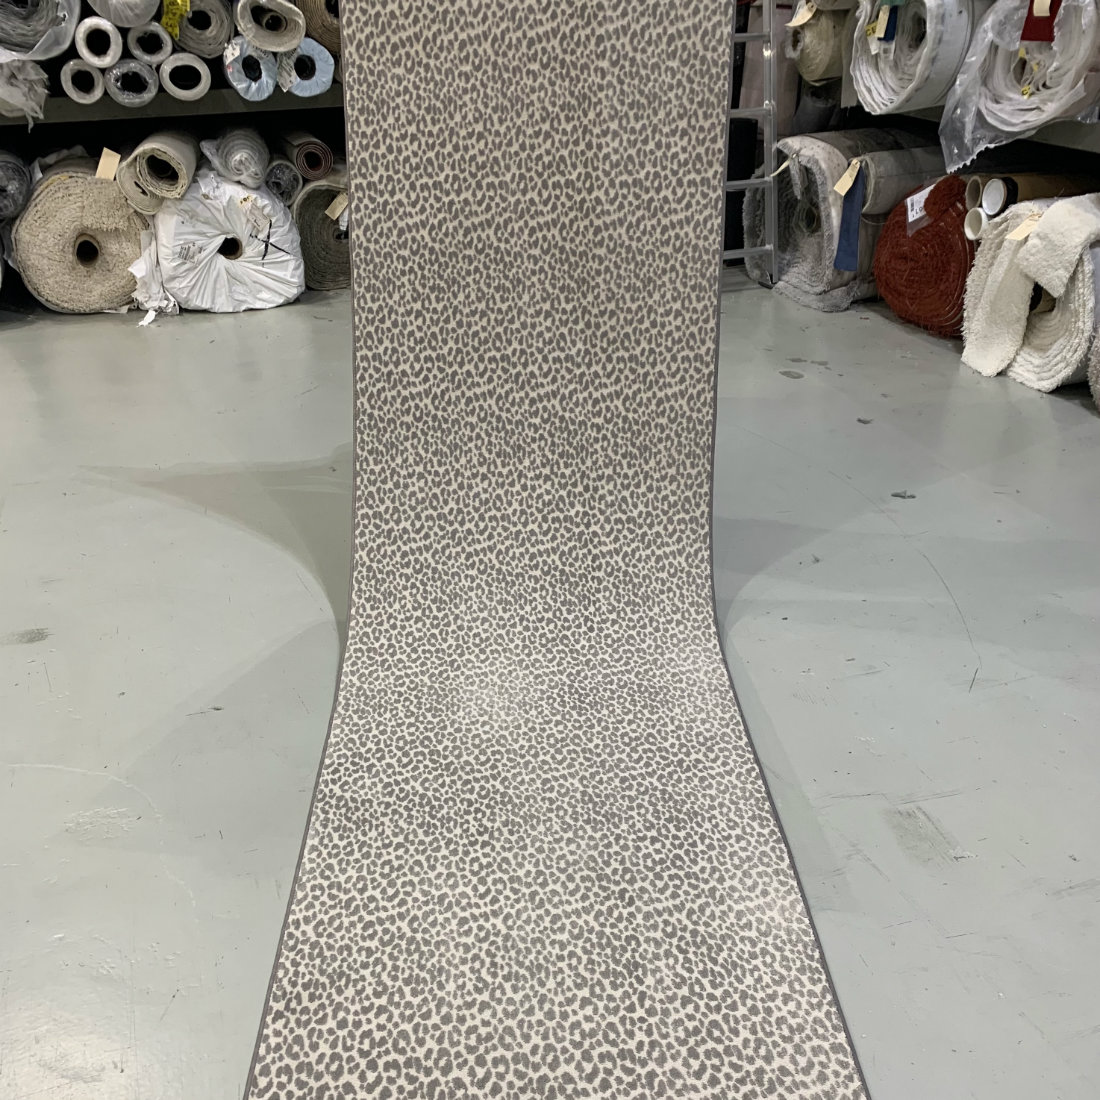 In Stock Leopard Vibes Dove Carpet Time Warehouse Nyc Animal Print